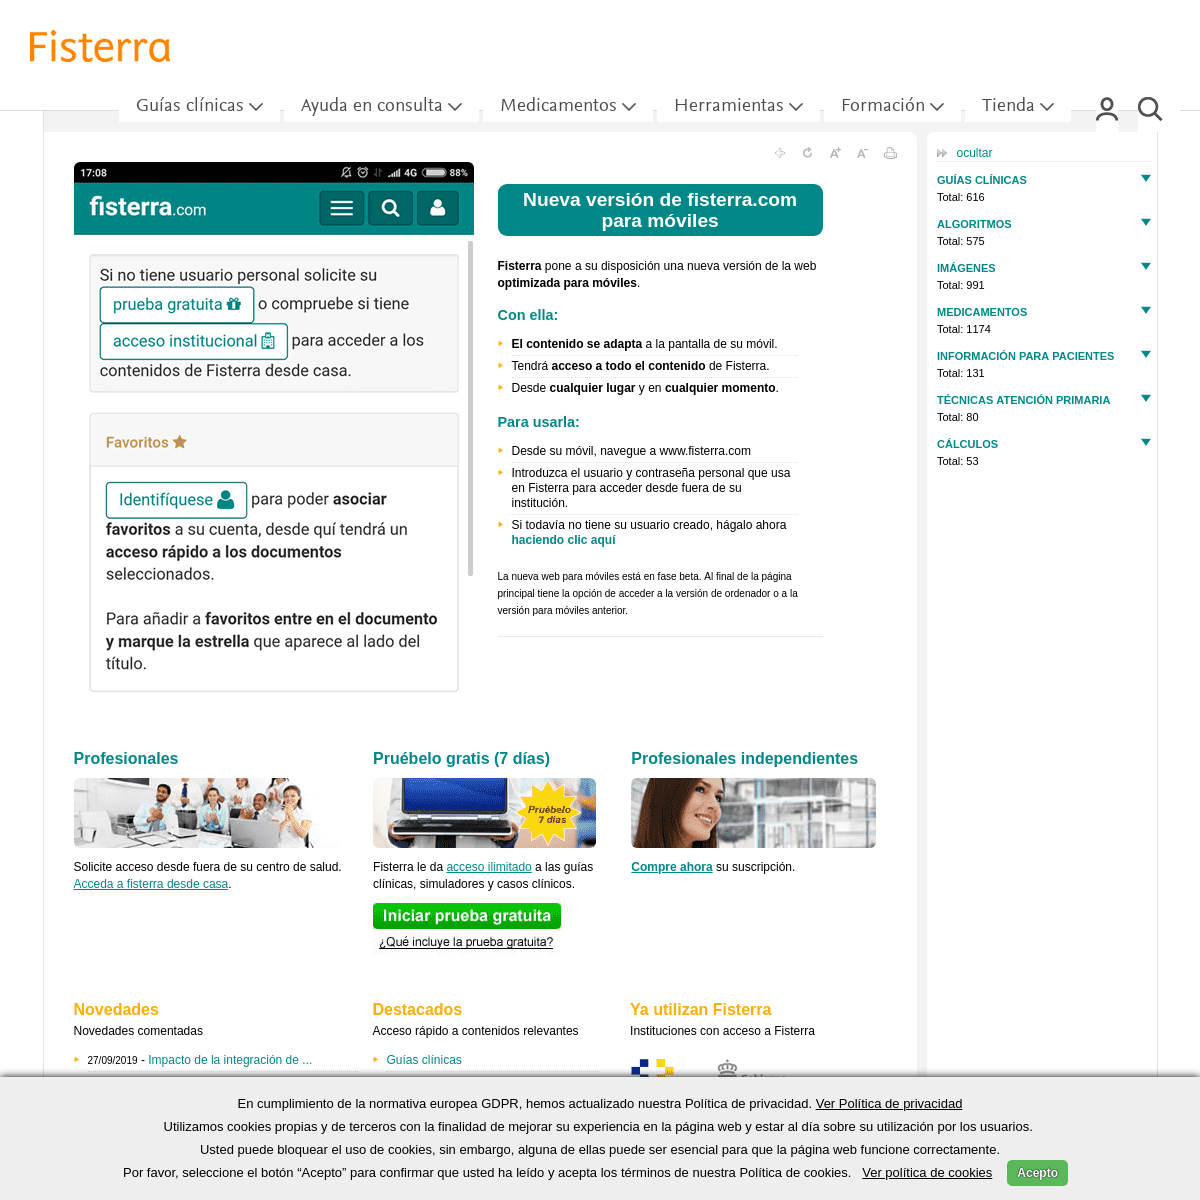 A complete backup of fisterra.com